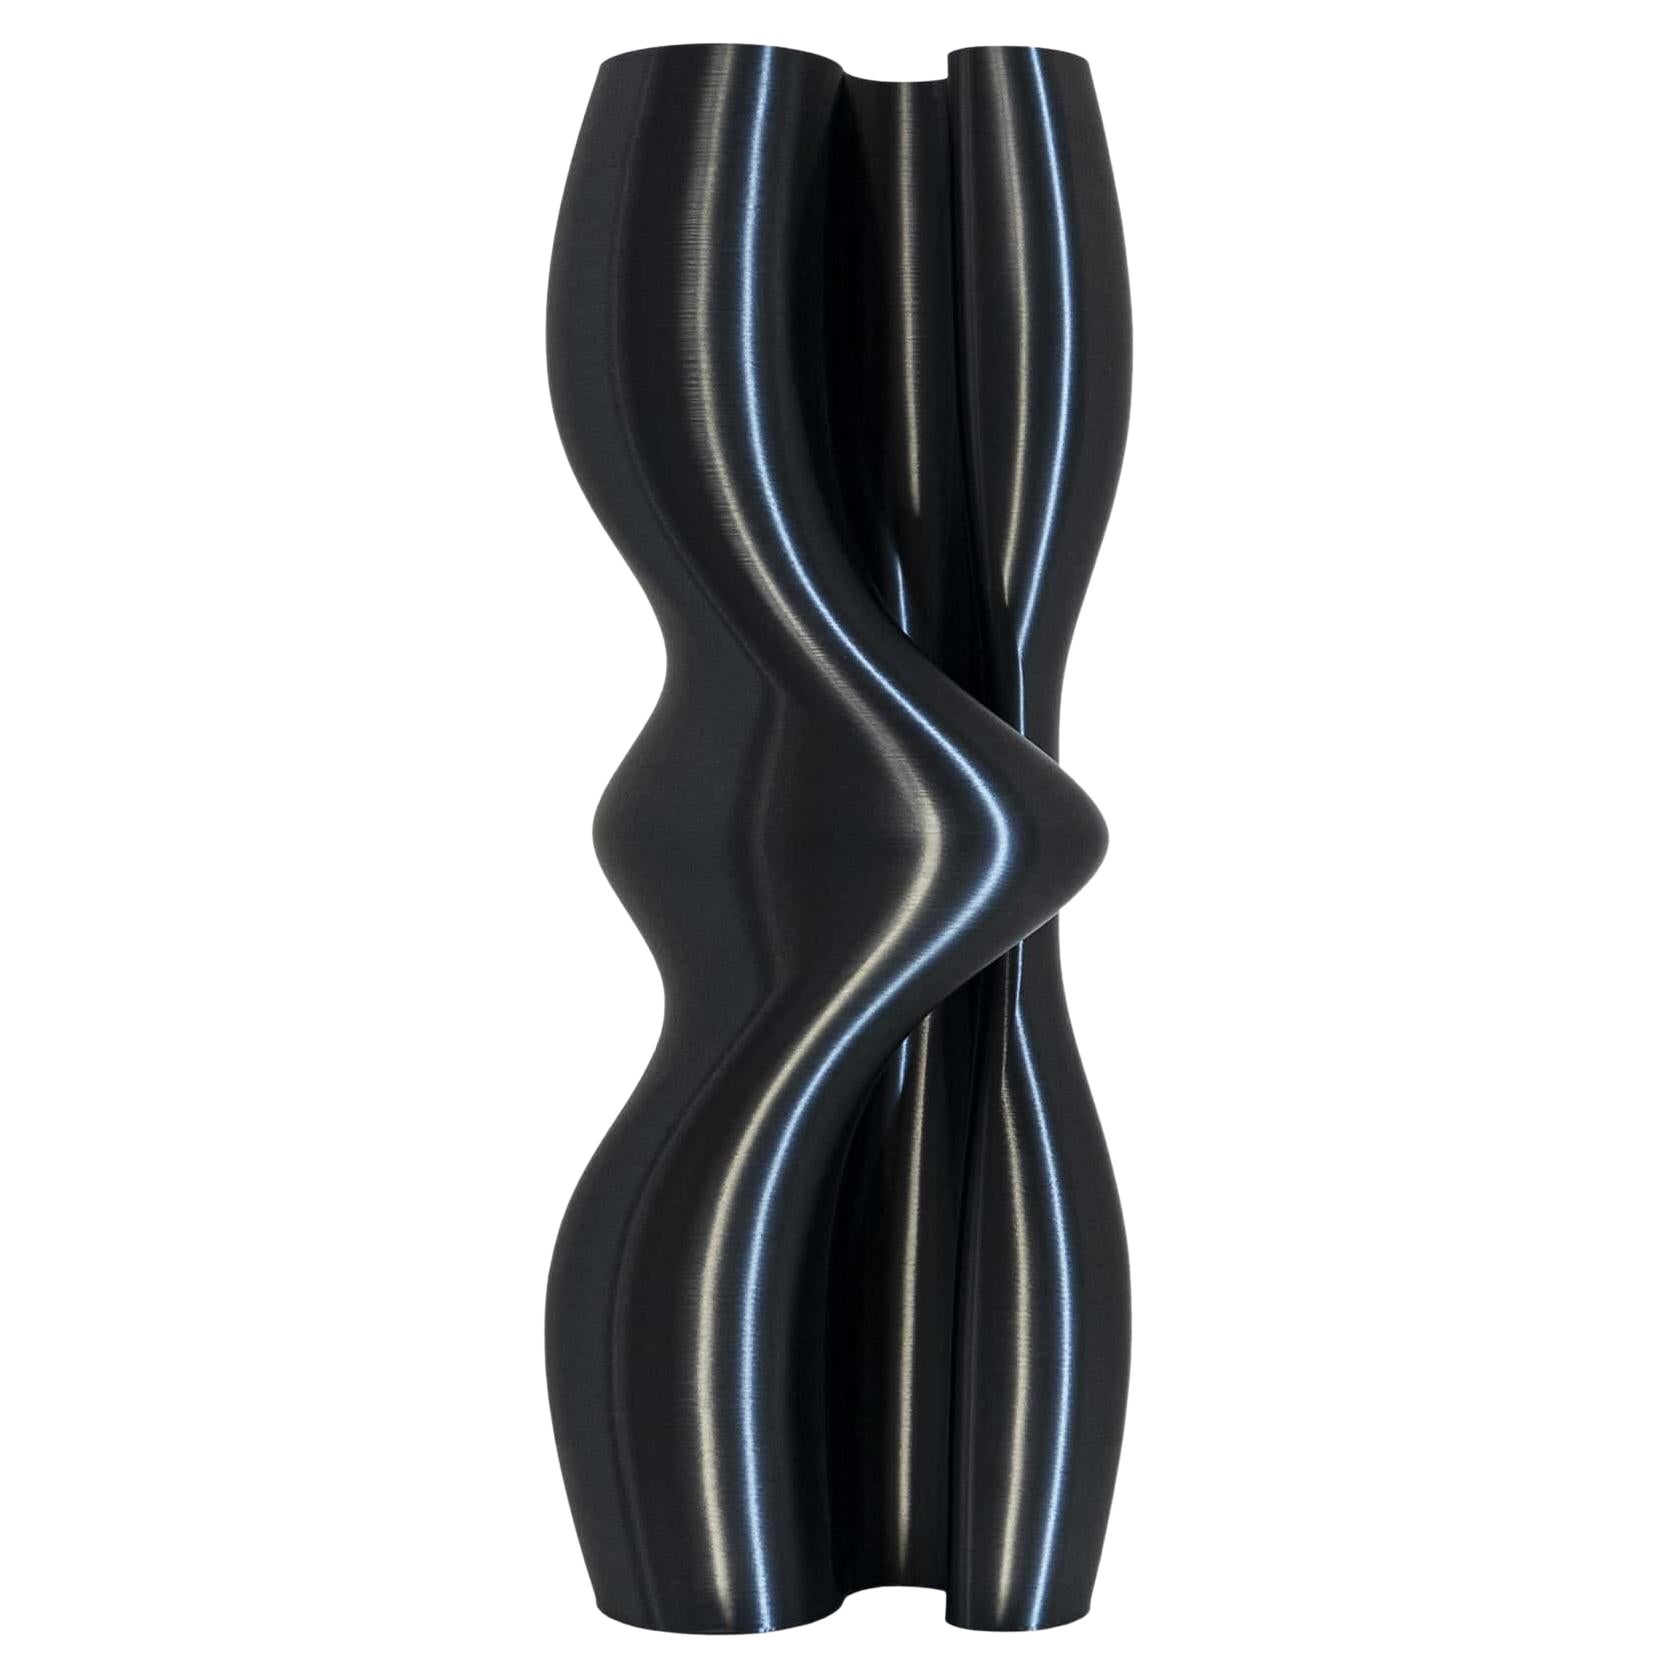 Feeling, Black Contemporary Sustainable Vase-Sculpture For Sale